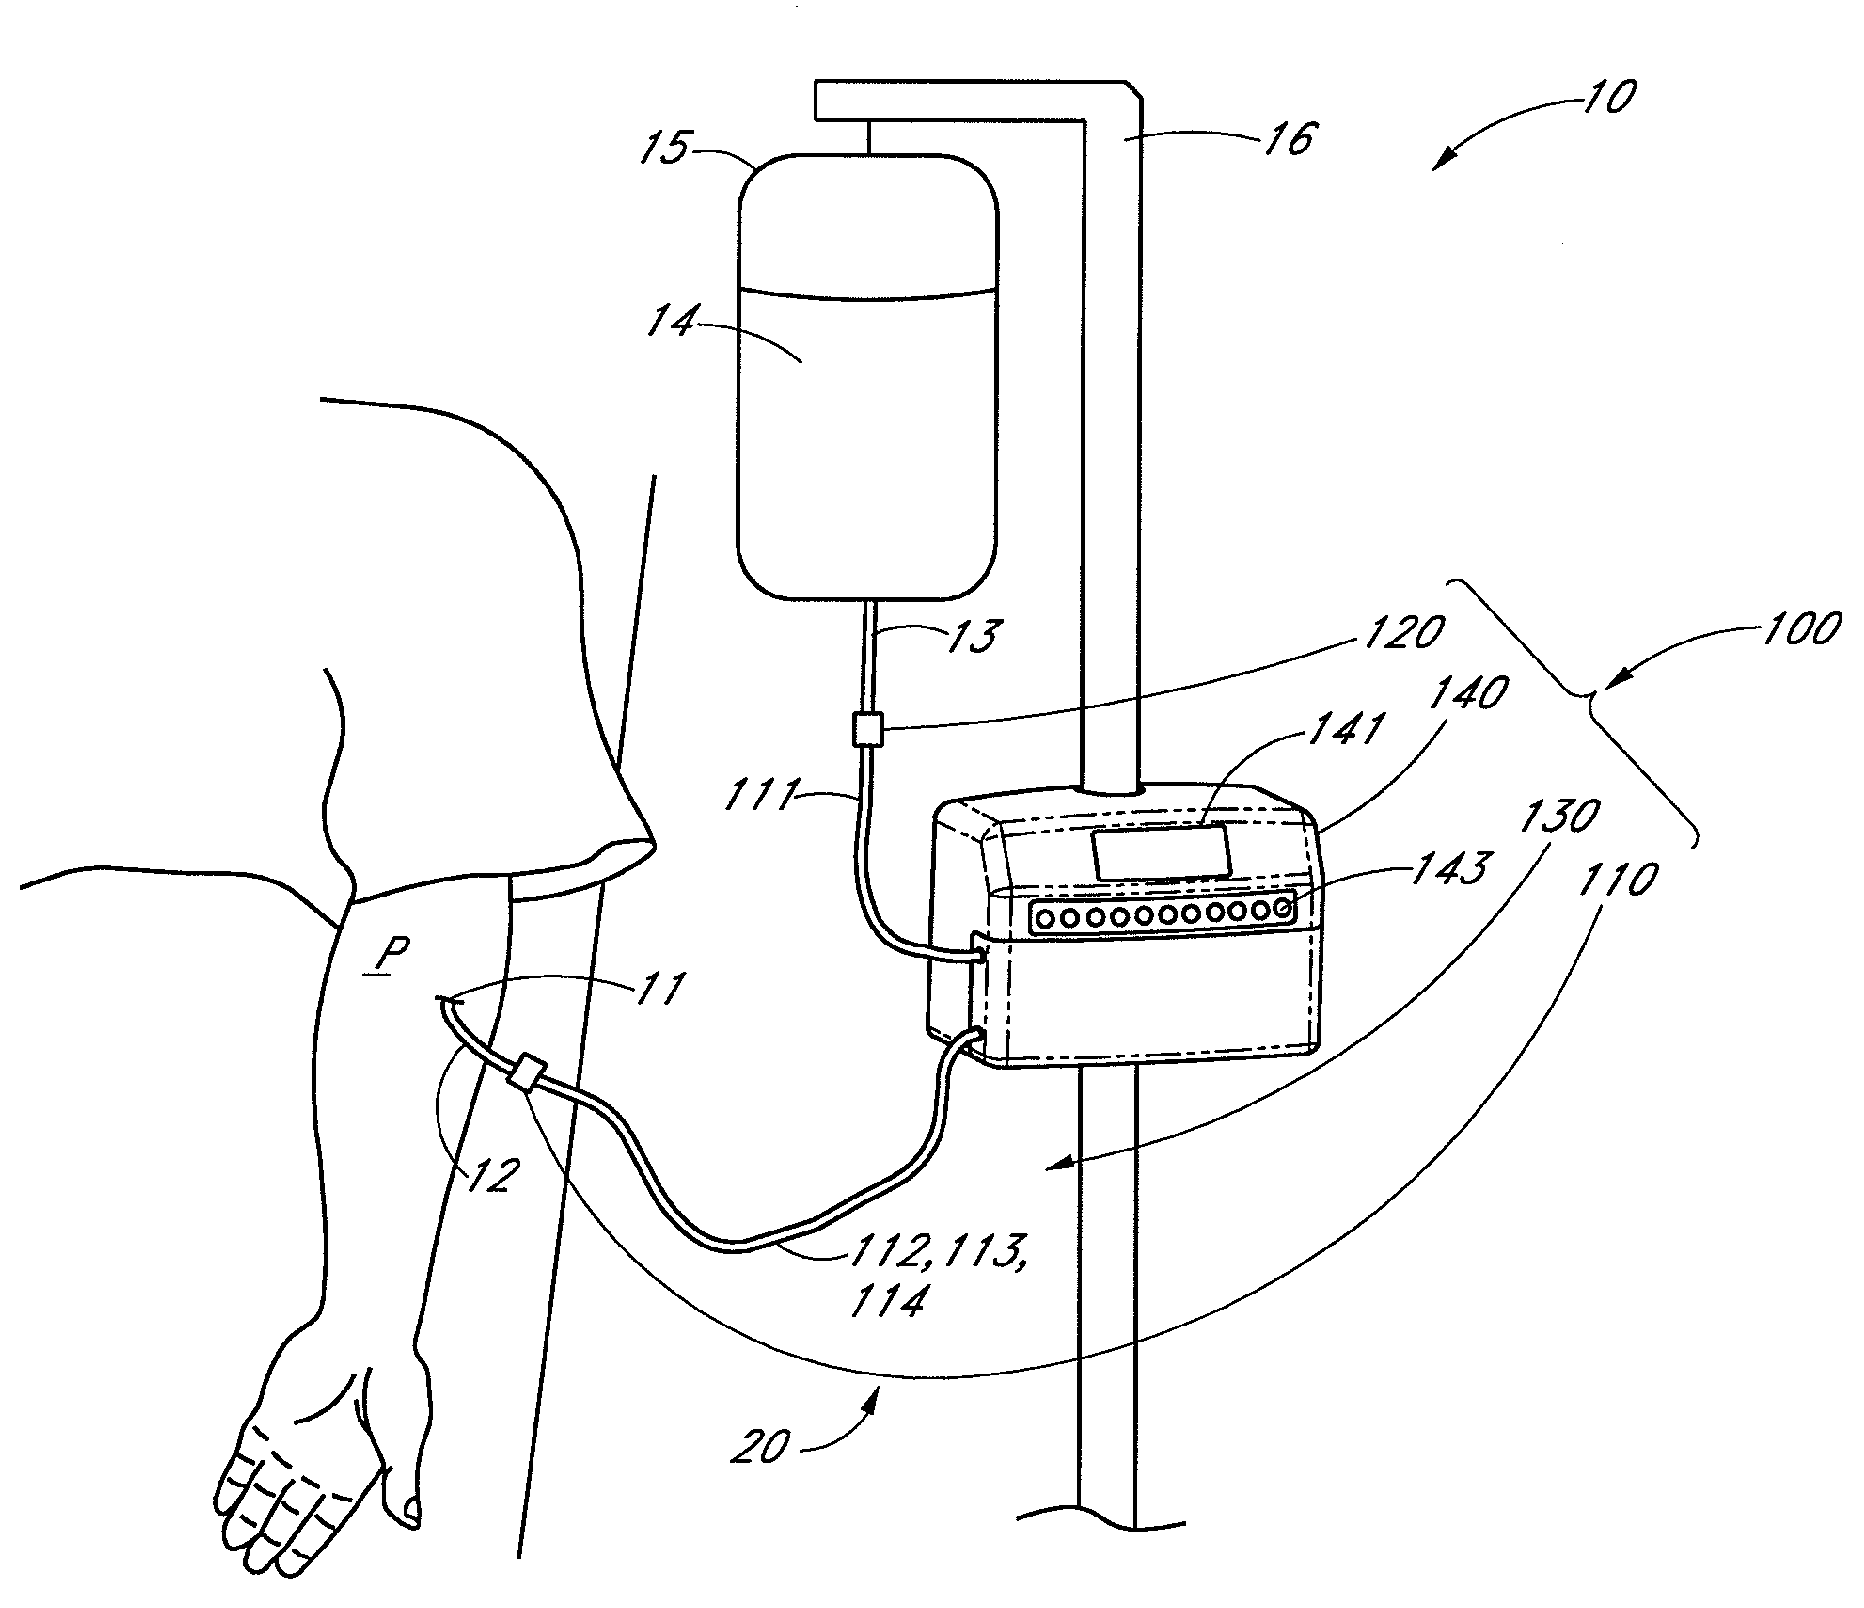 Anti-clotting apparatus and methods for fluid handling system